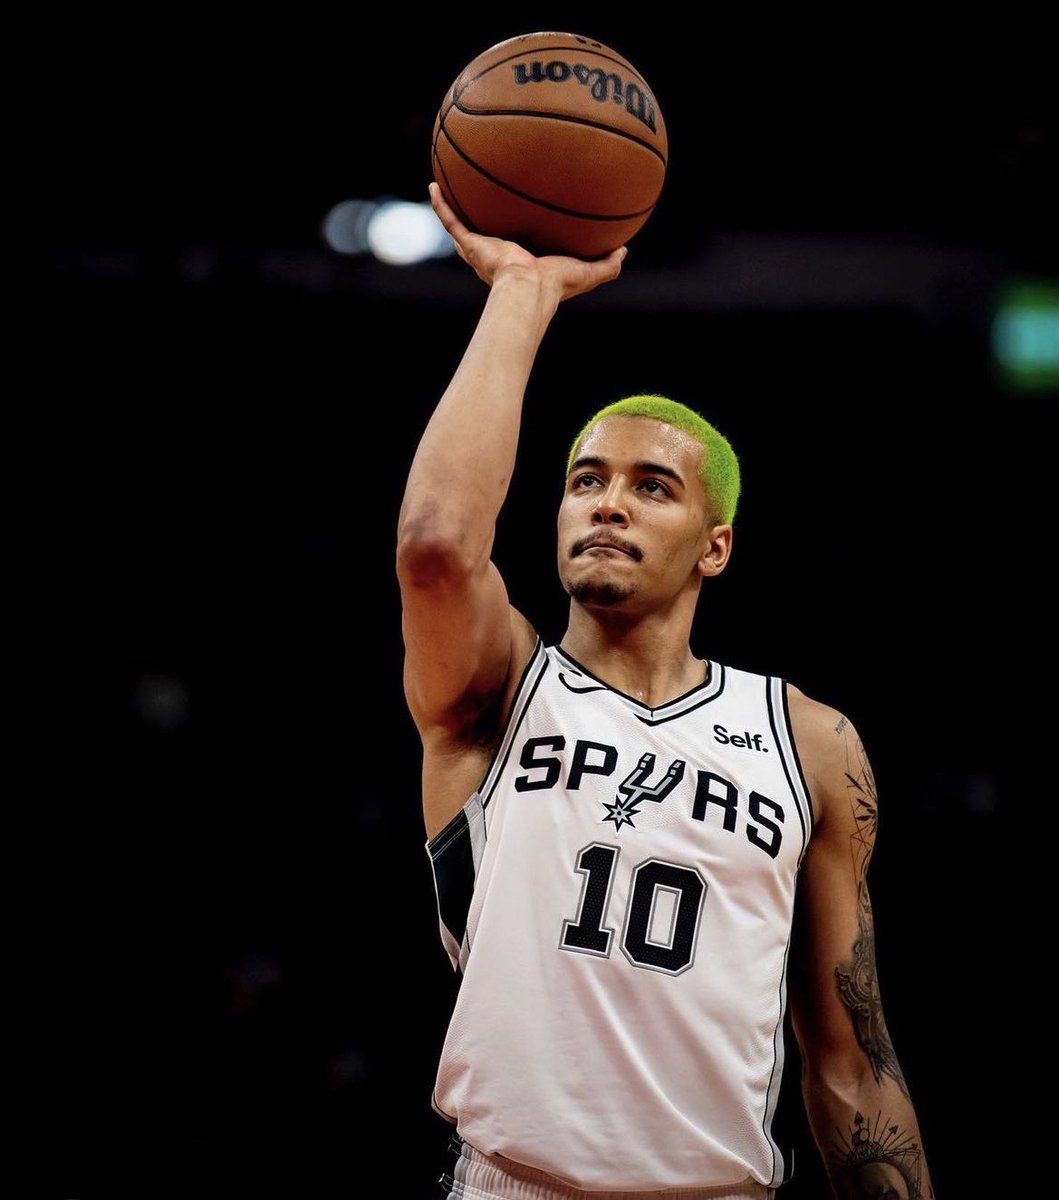 In his rookie season, Jeremy Sochan finished the year with averages of:

11.0 ppg
5.3 rpg
2.5 ast

45.3% FG
24.6% 3PT
69.8% FT

Which category will Jeremy make the biggest leap in his sophomore season? 
#PorVida #GoSpursGo